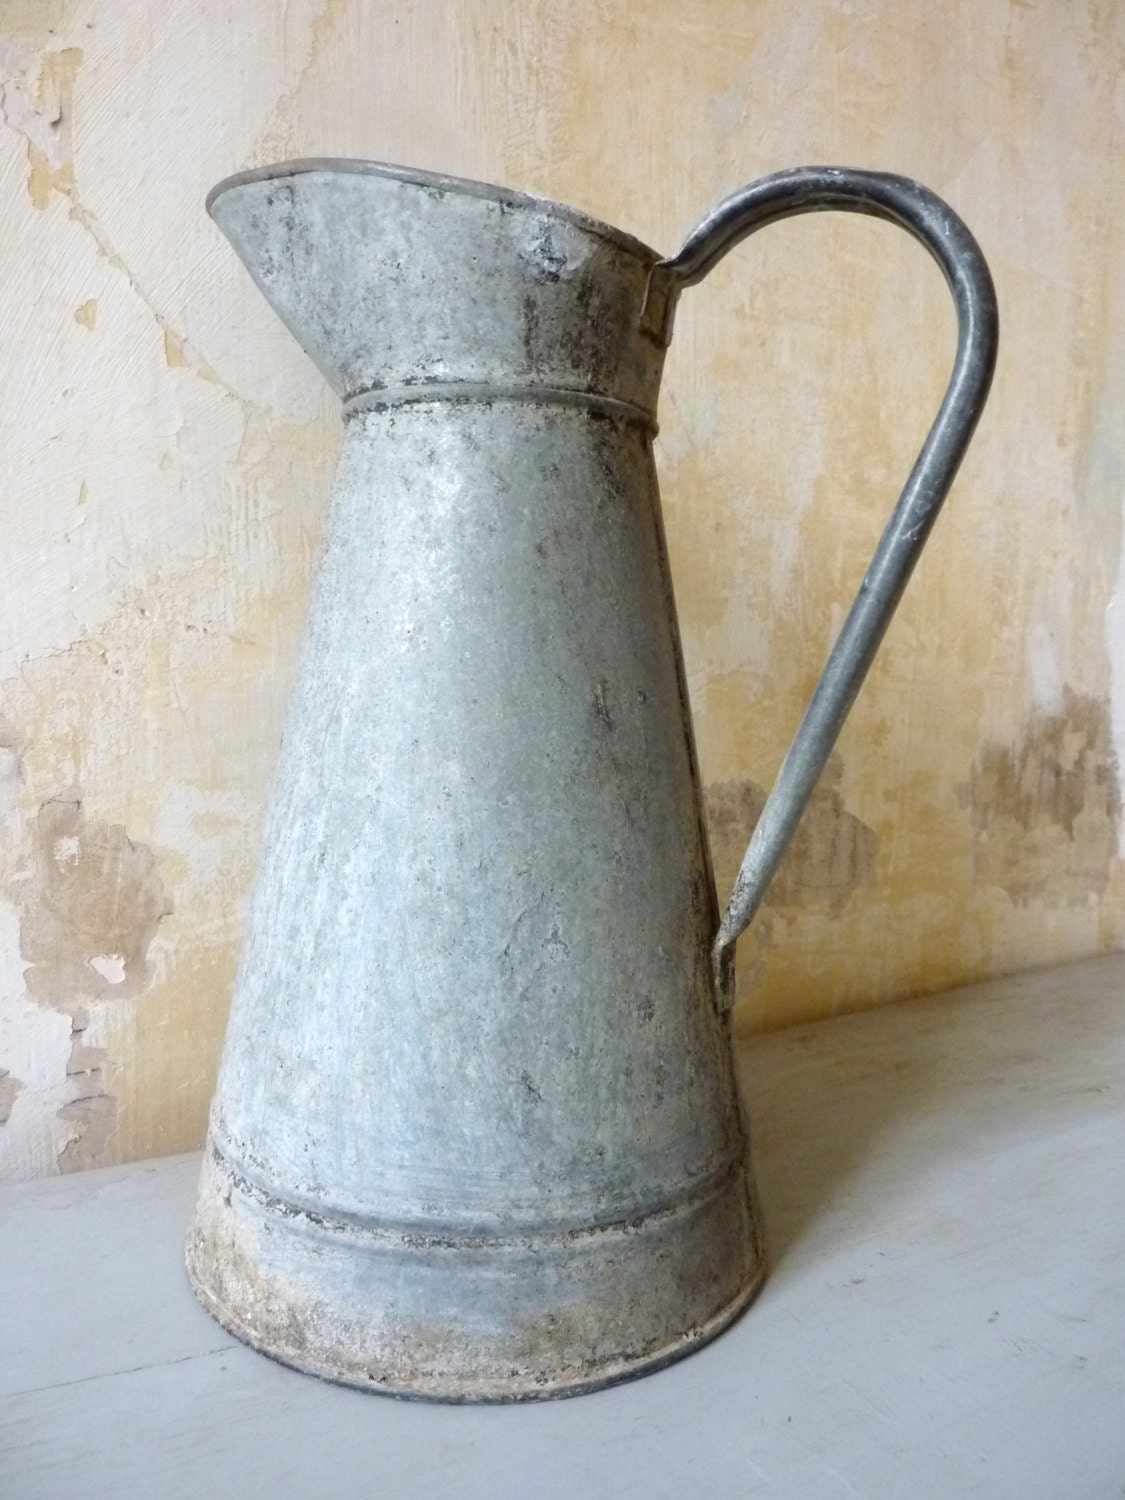 Vintage French Watering Can in Beautiful Condition.